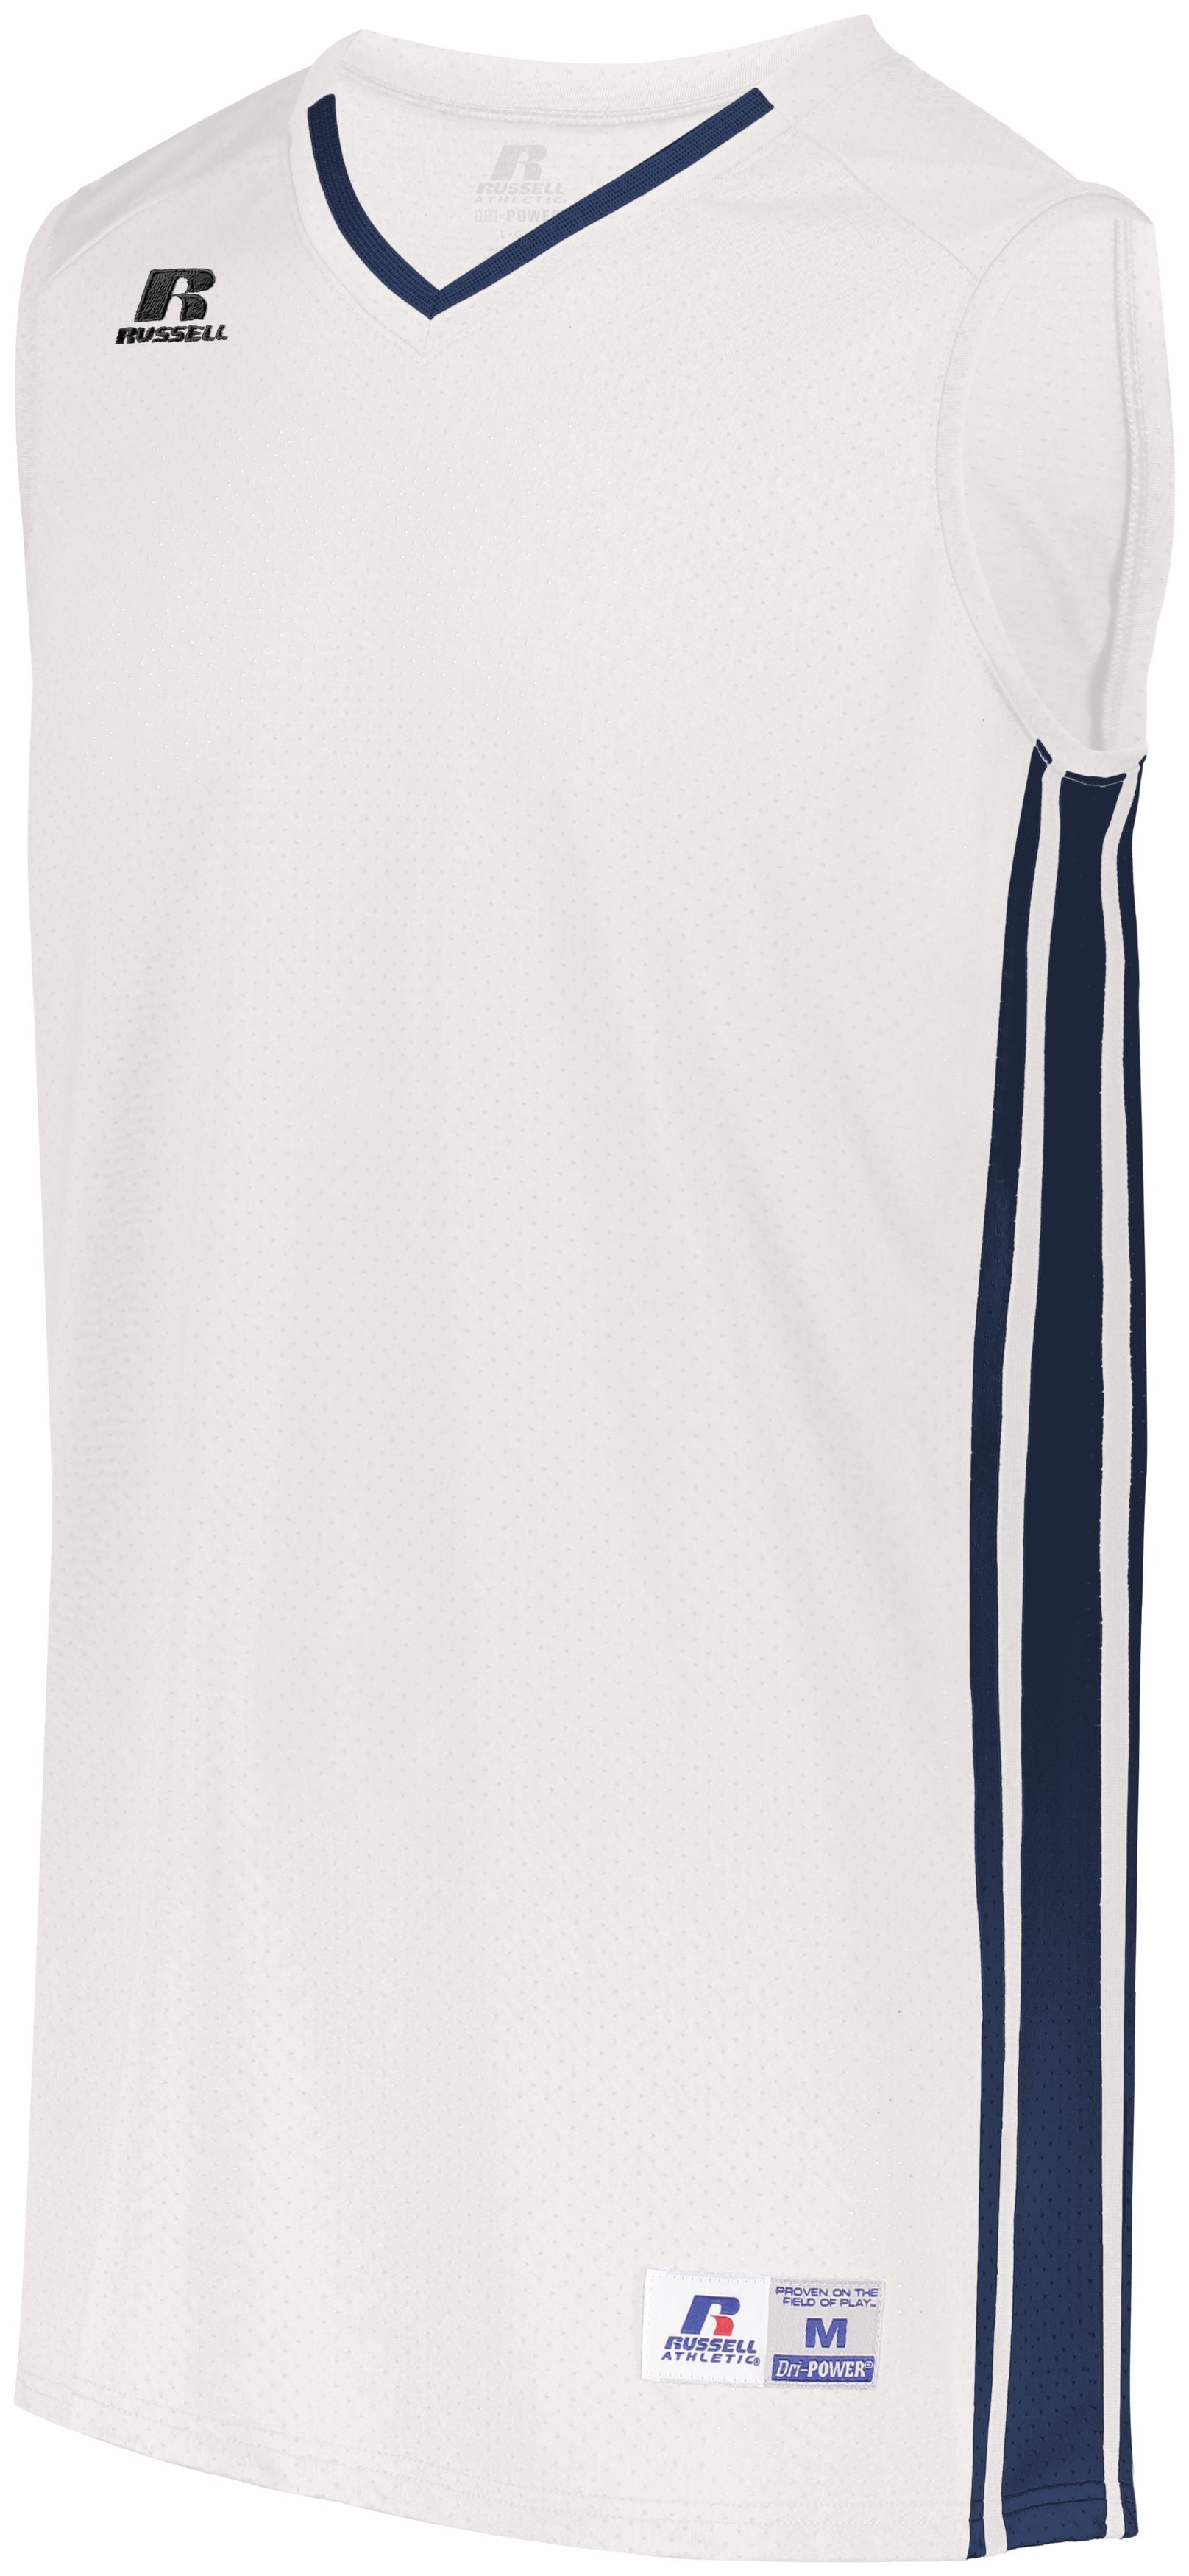 Russell Athletic Legacy Basketball Jersey in White/Navy  -Part of the Adult, Adult-Jersey, Basketball, Russell-Athletic-Products, Shirts, All-Sports, All-Sports-1 product lines at KanaleyCreations.com